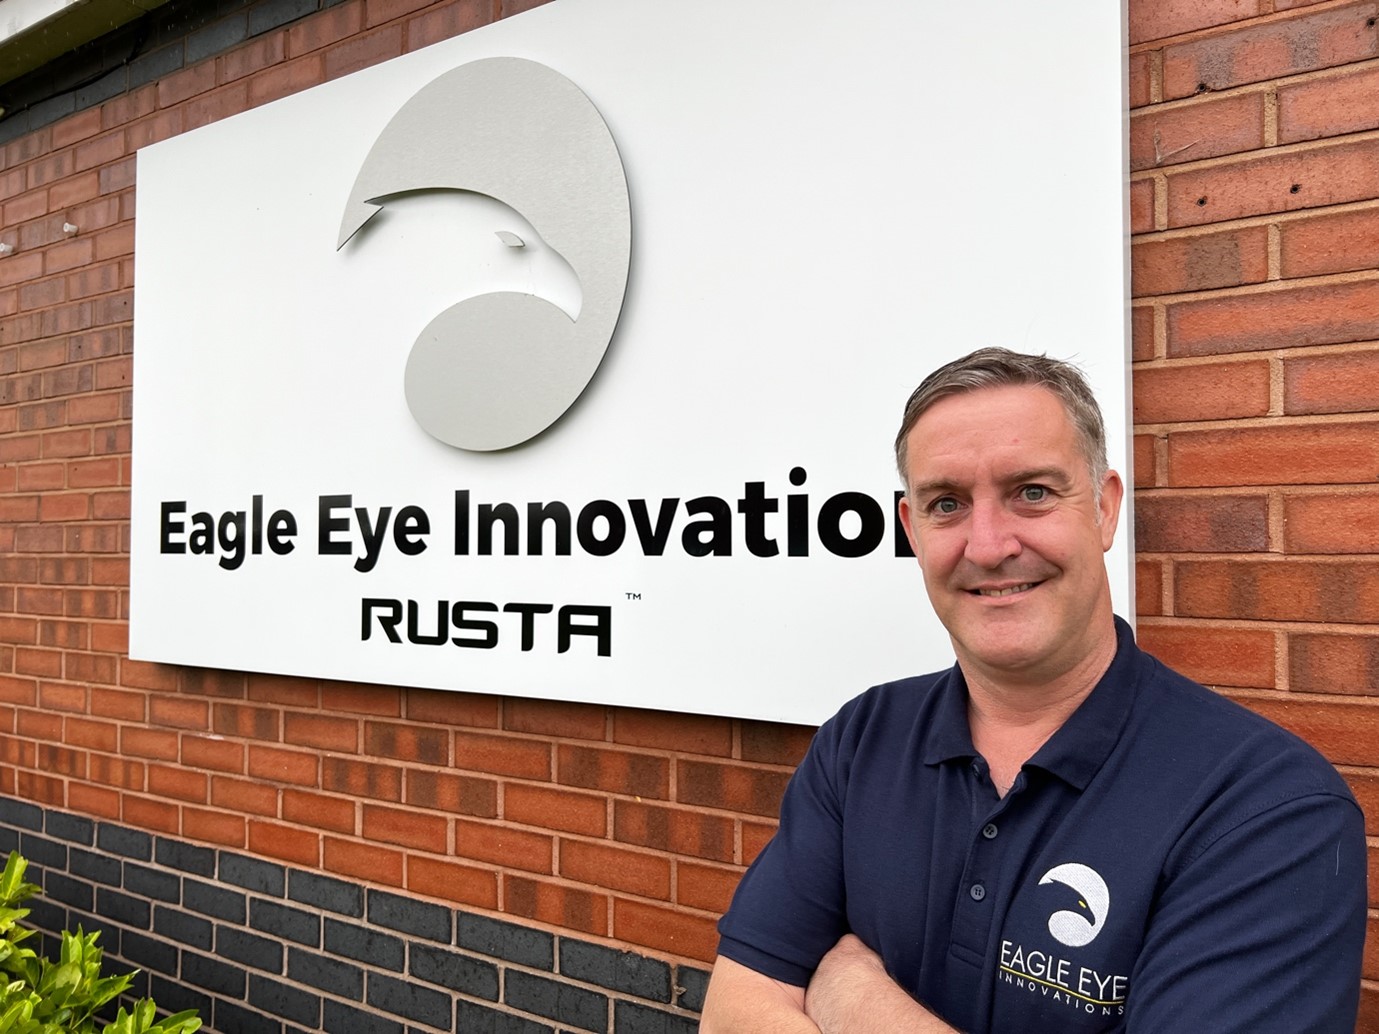 Man stood in front of Eagle Eye Innovations RUSTA sign.